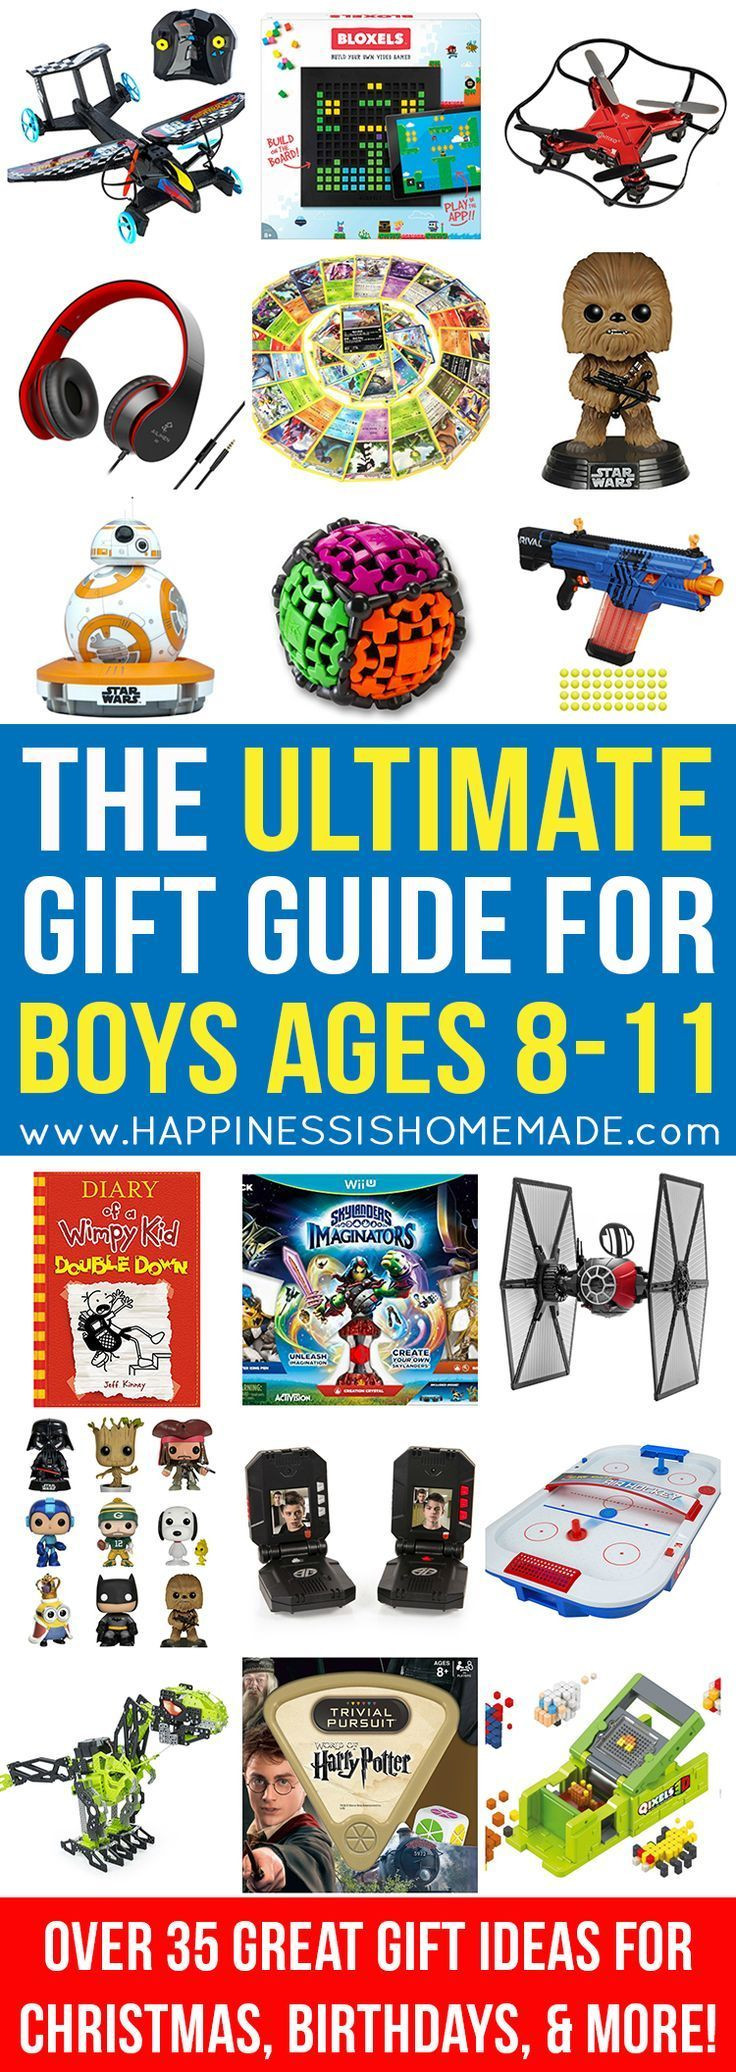 Gift Ideas For Boys Age 6
 The Best Gift Ideas for Boys Ages 8 11 Looking for t